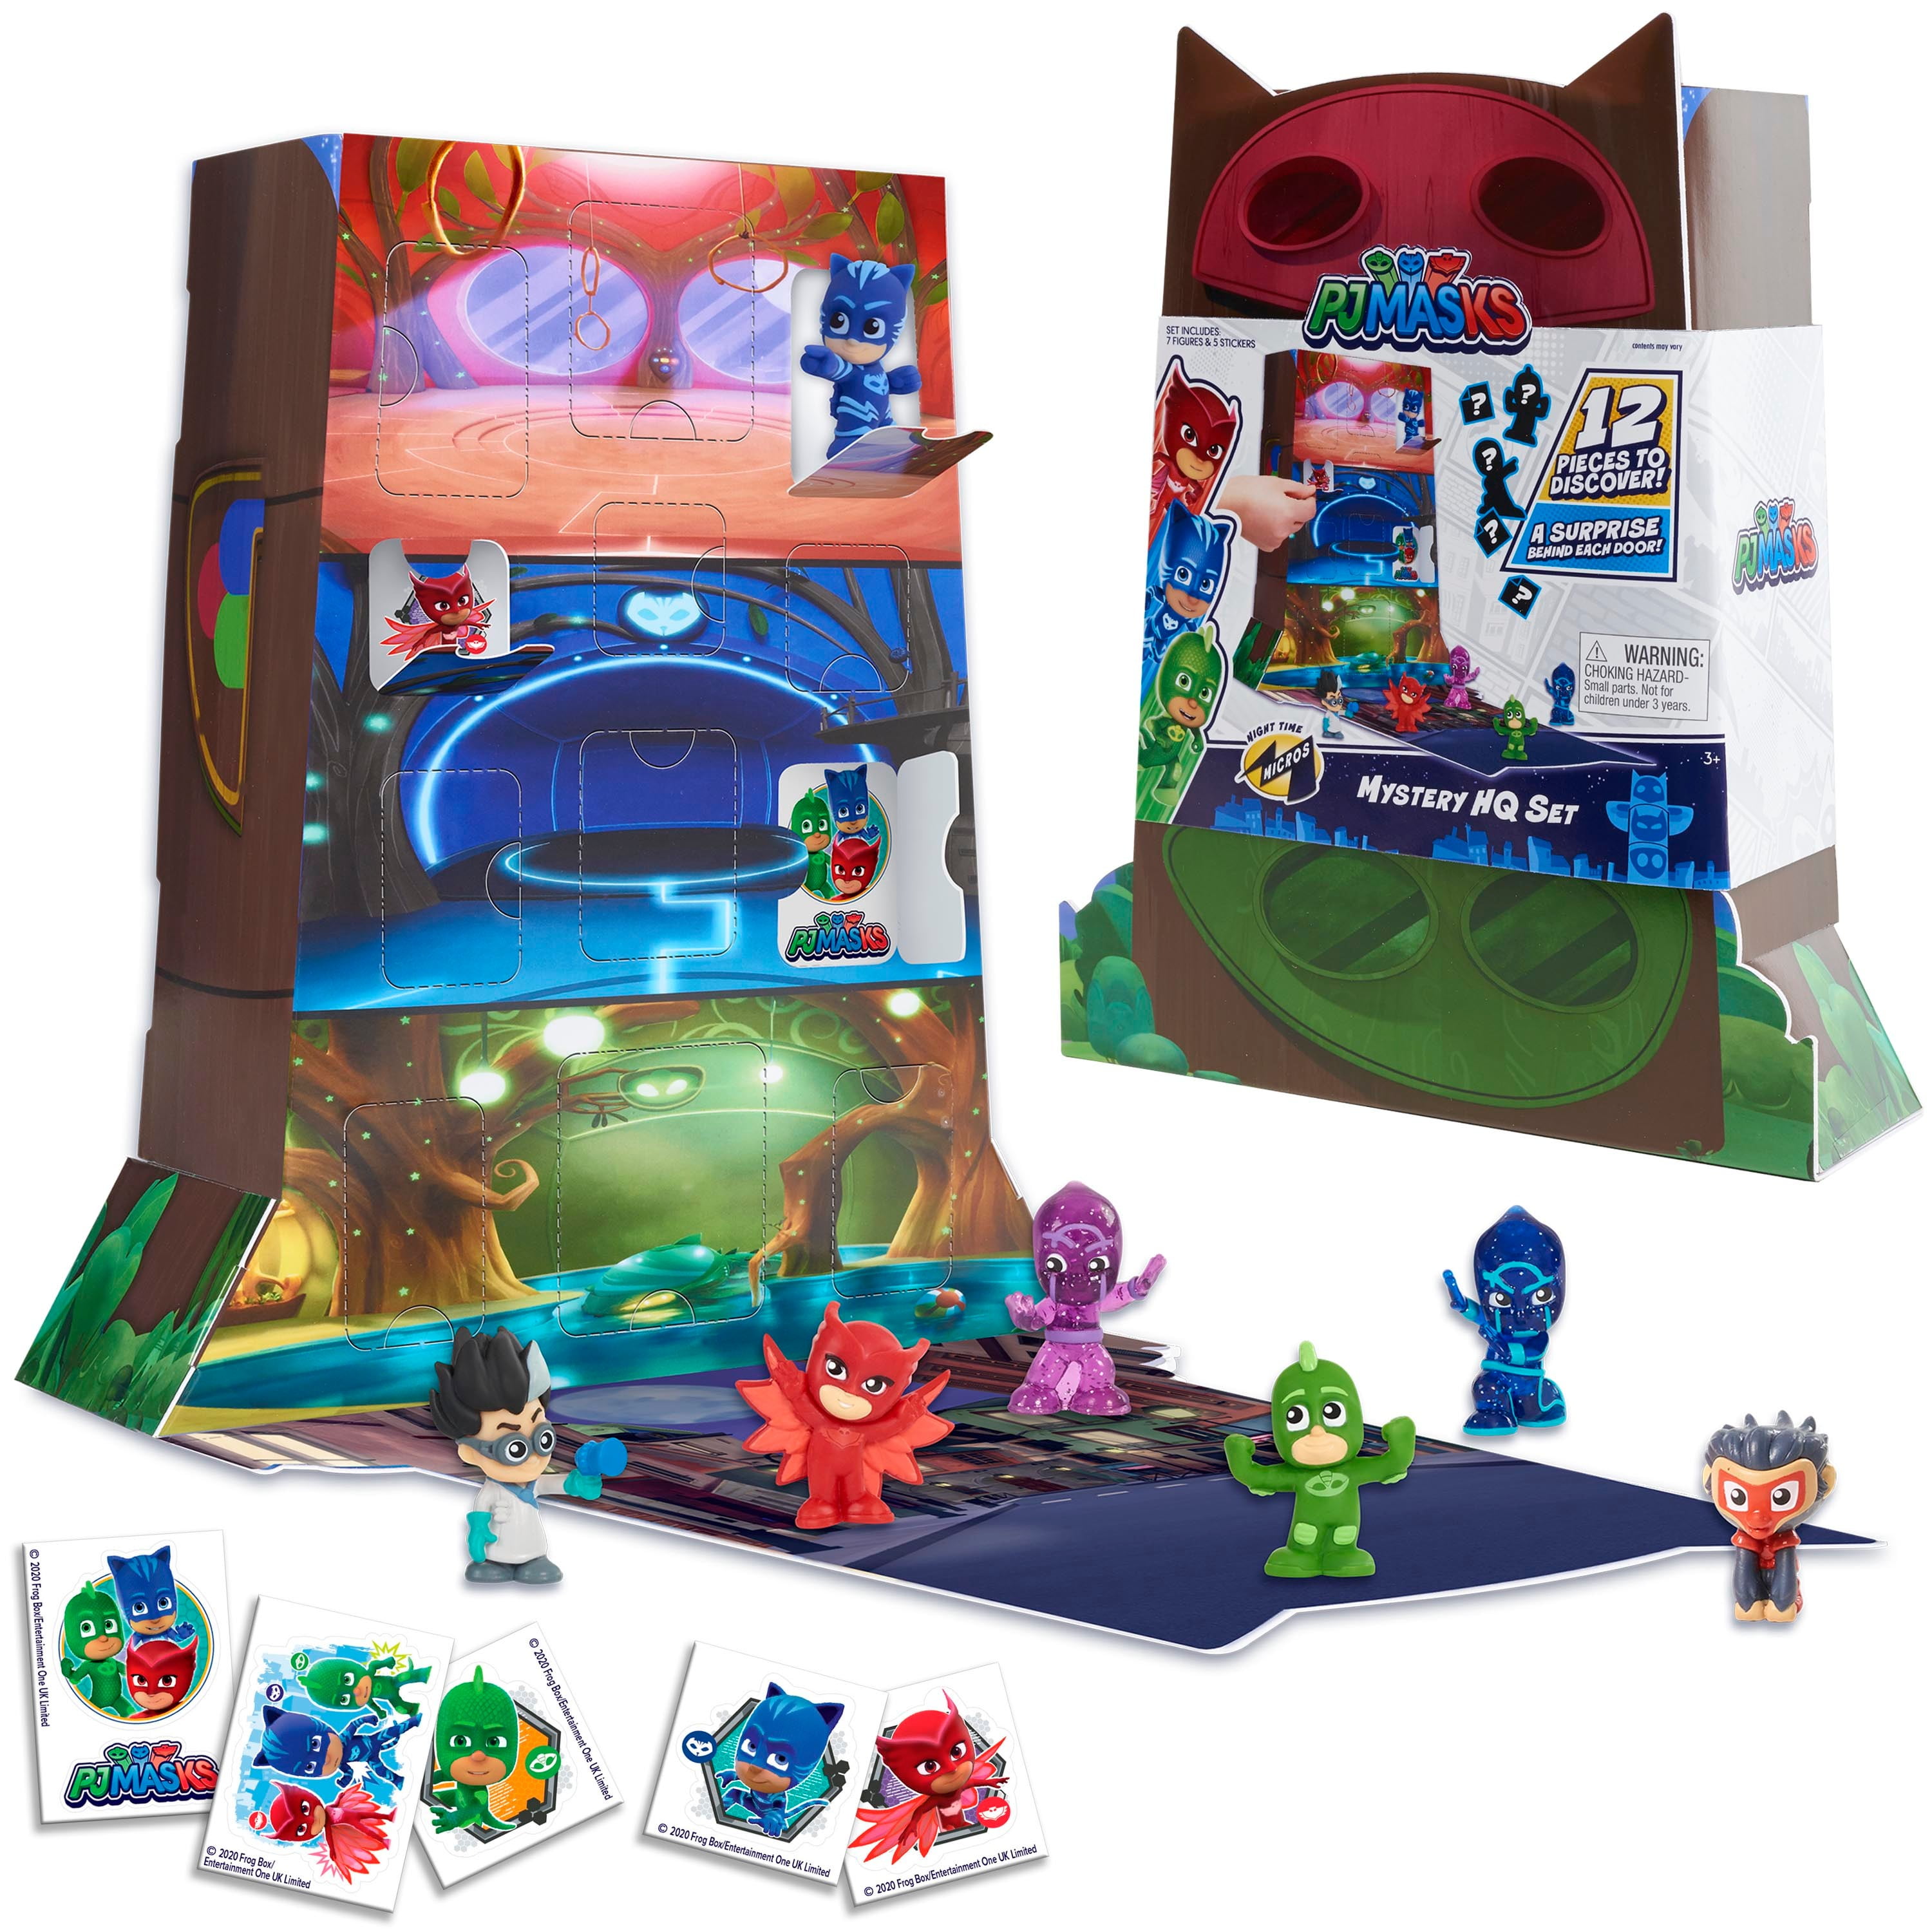 PJ Masks Night Time Micros Mystery HQ Box Set, Kids Toys for Ages Up, Gifts and Presents - Walmart.com